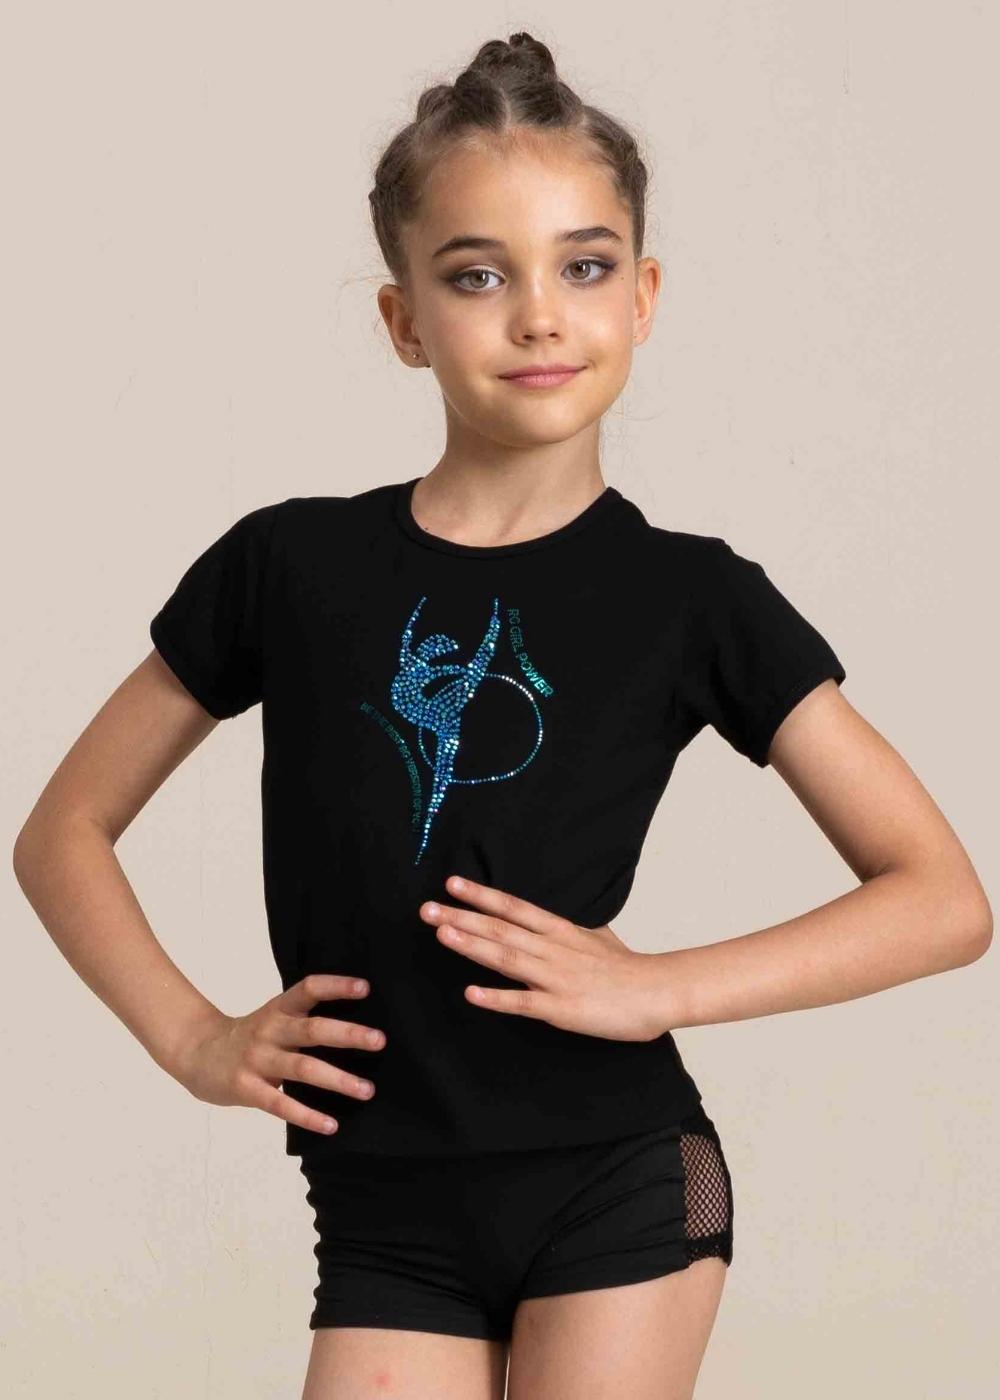 PALOMA T-shirt, gymnast with a hoop by Grand Prix